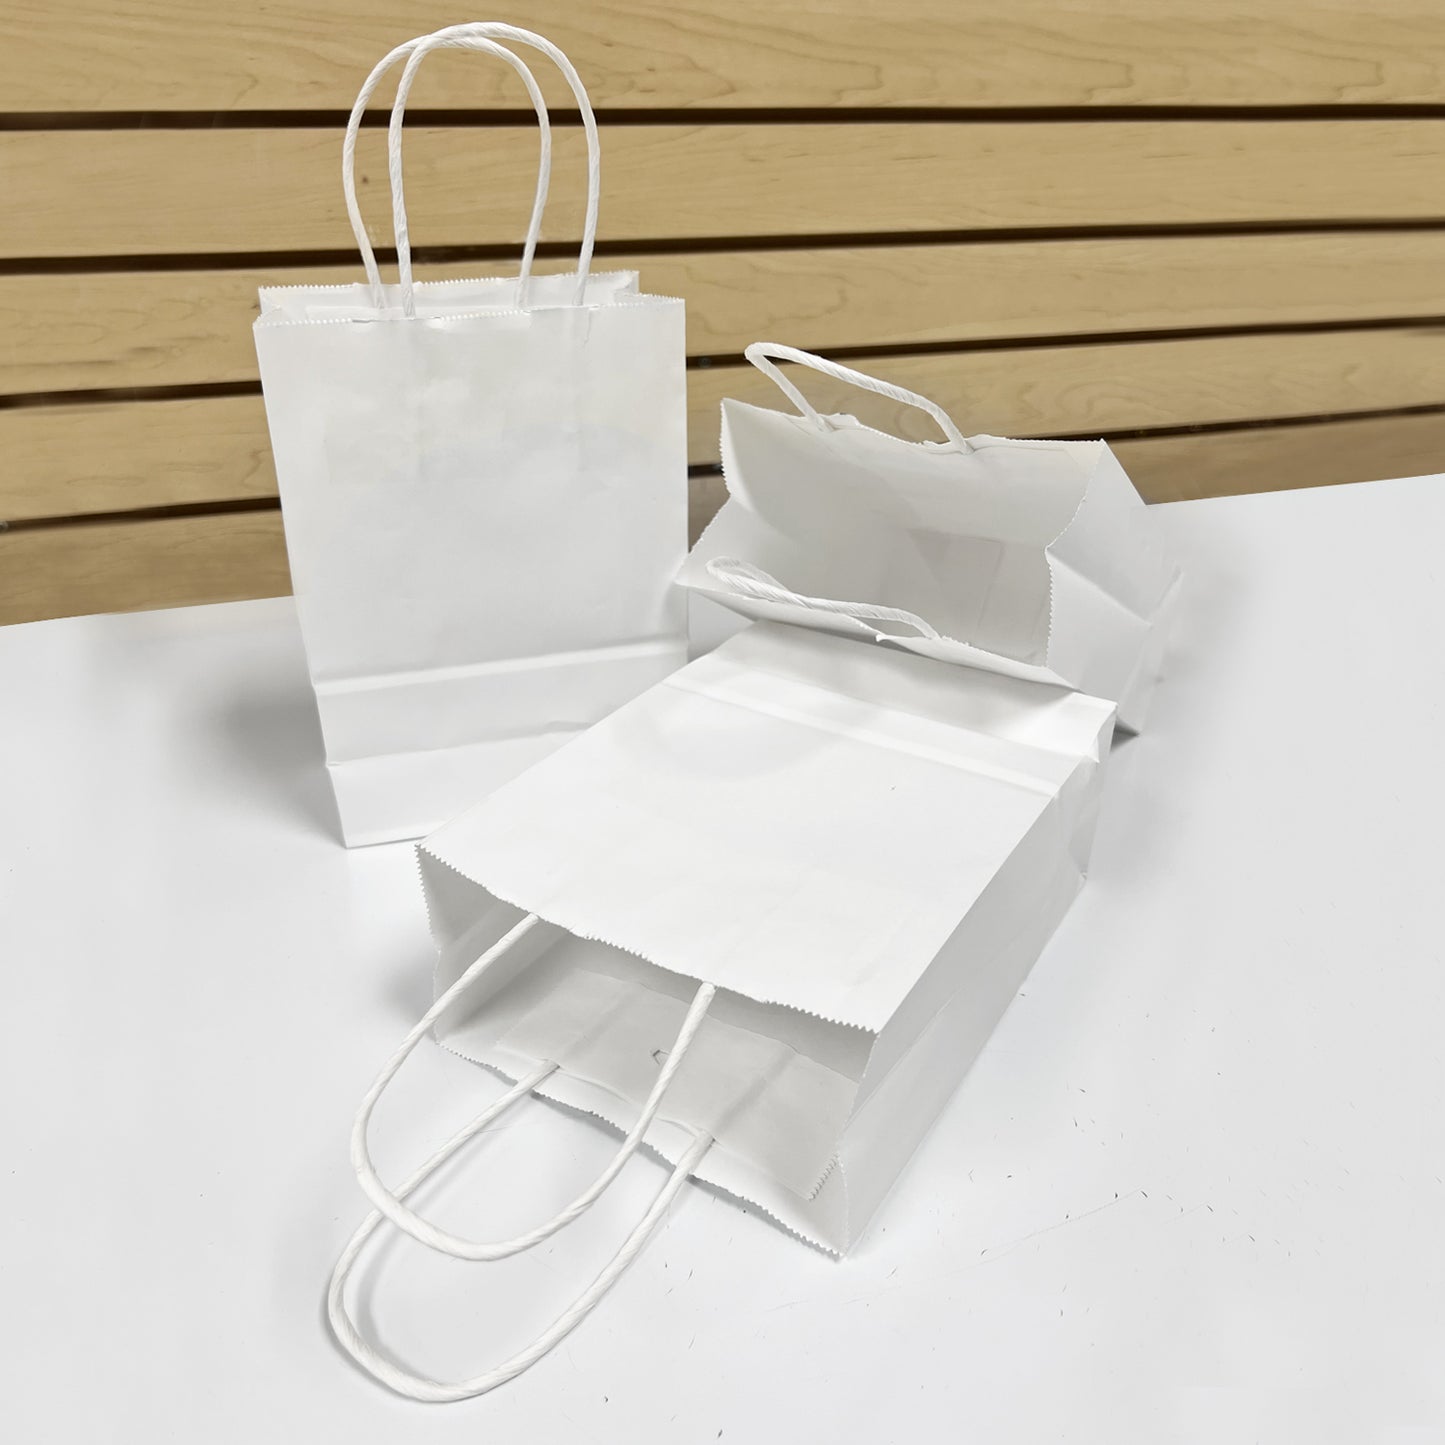 250 Pcs, Gem,  5.3x3.5x8.5 inches, White Paper Bags, with Flat Handle